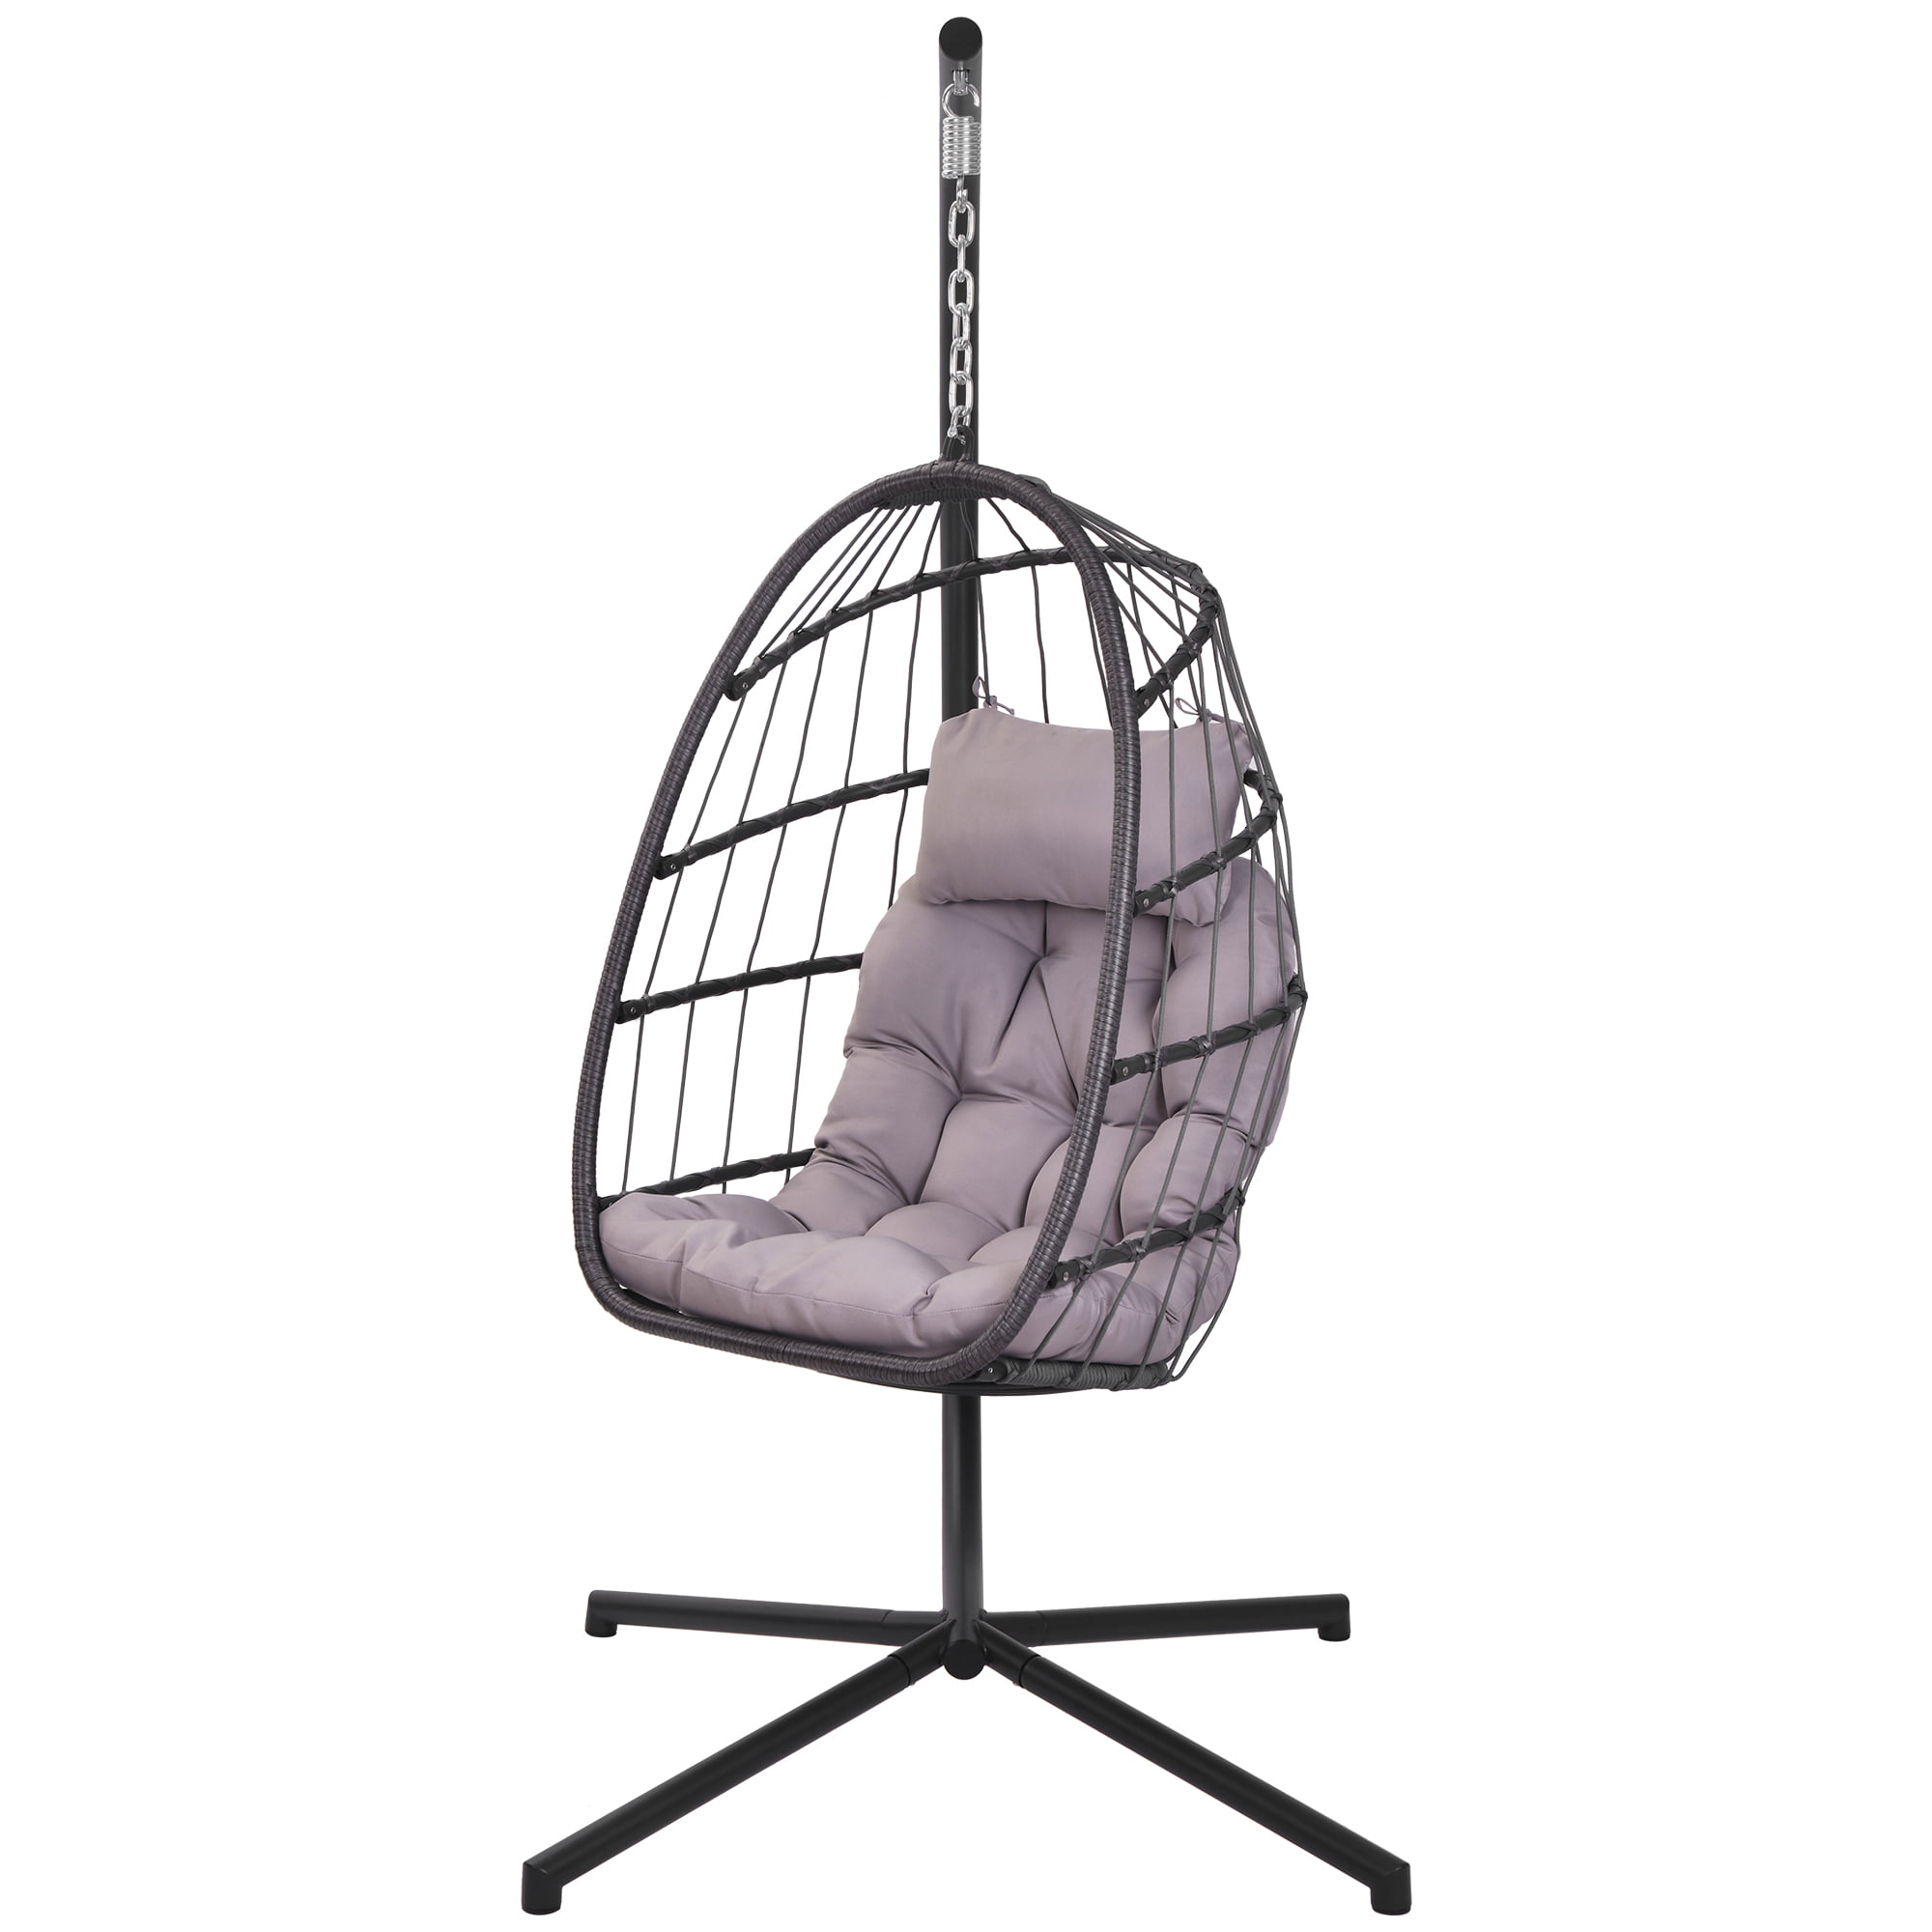 Details about   Hanging Hammock Swing Chair Egg Wicker Stand Seat Cover Patio Garden Outdoor 